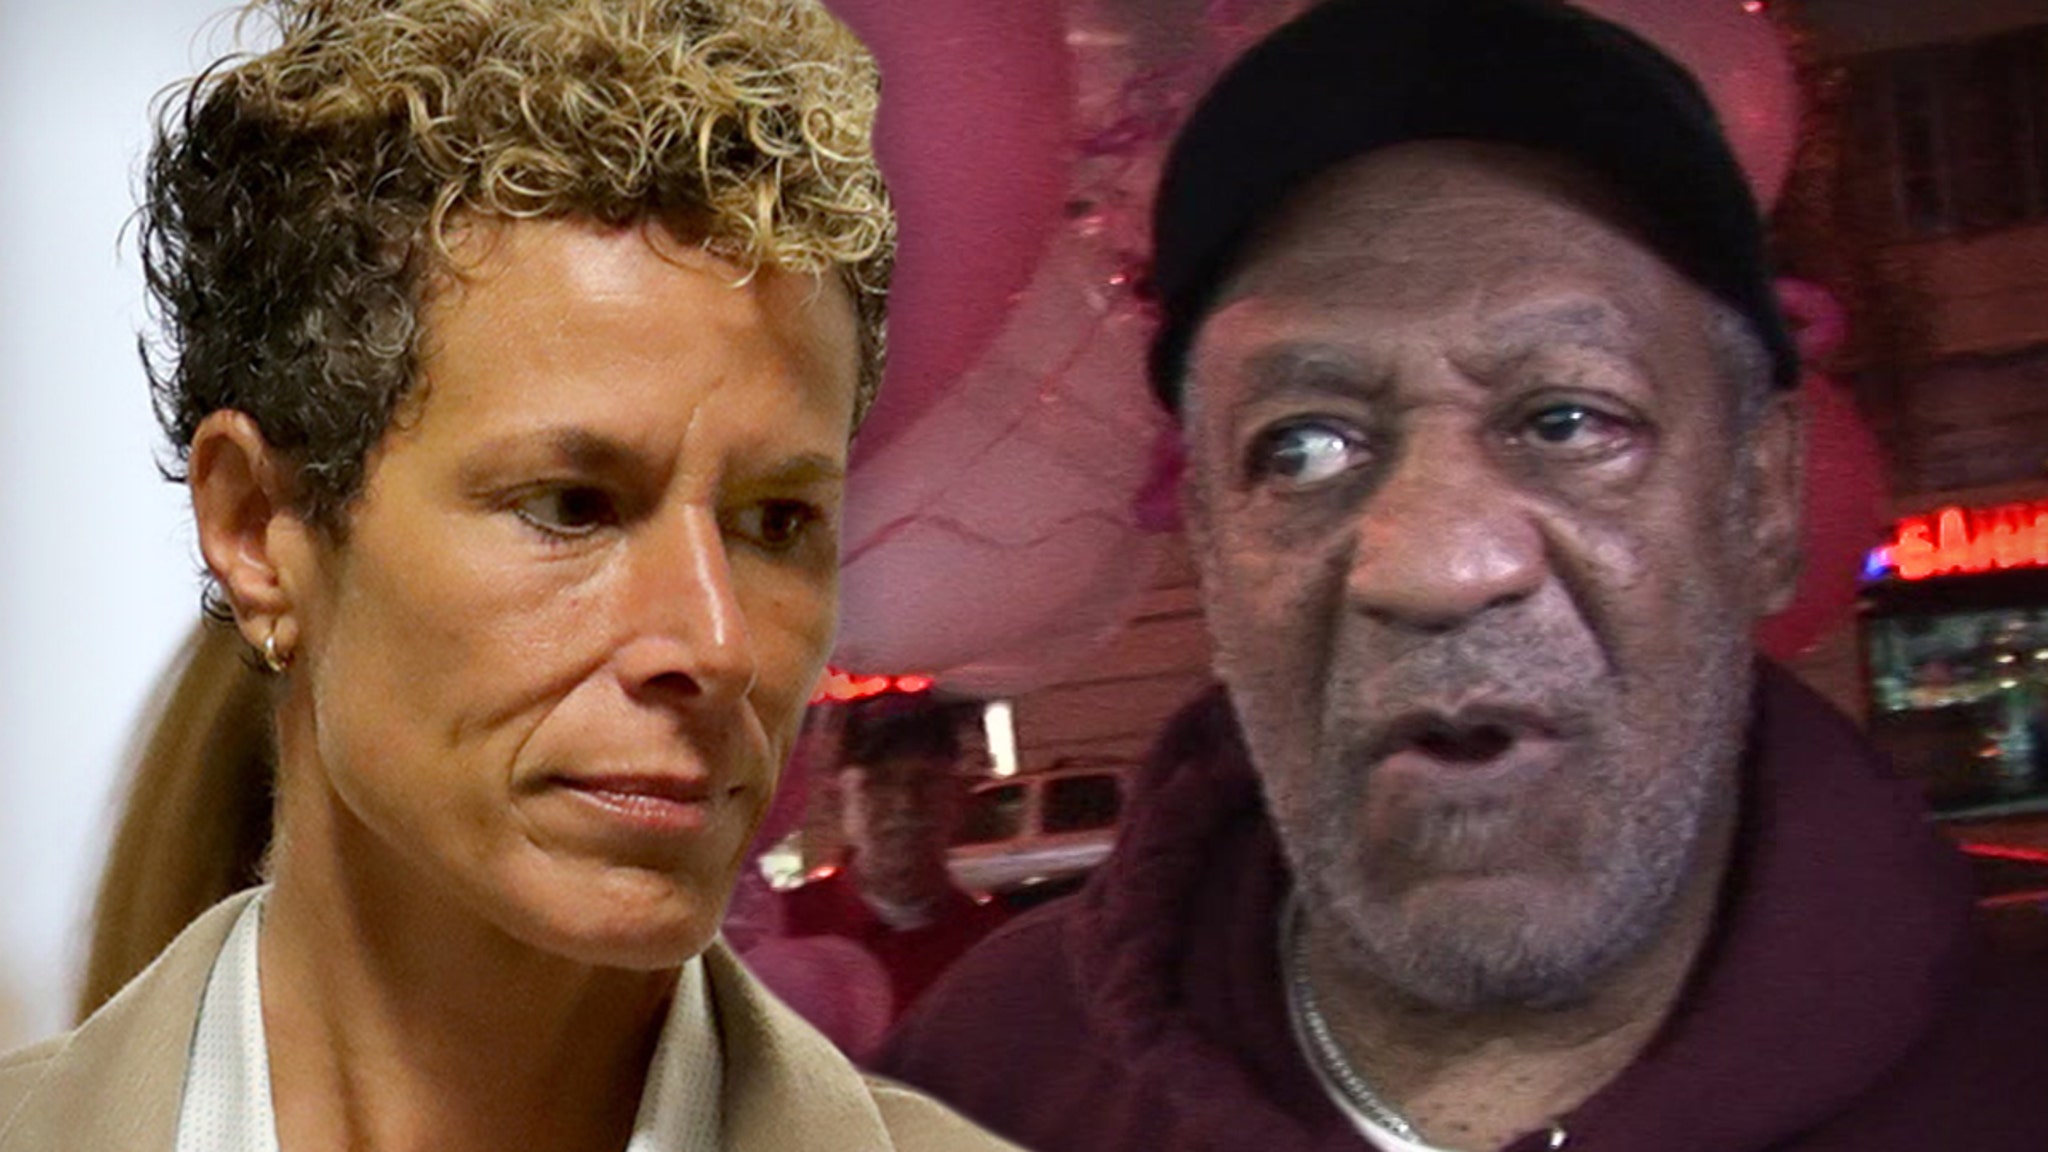 Andrea Constand Rips Bill Cosby's Overturned Conviction